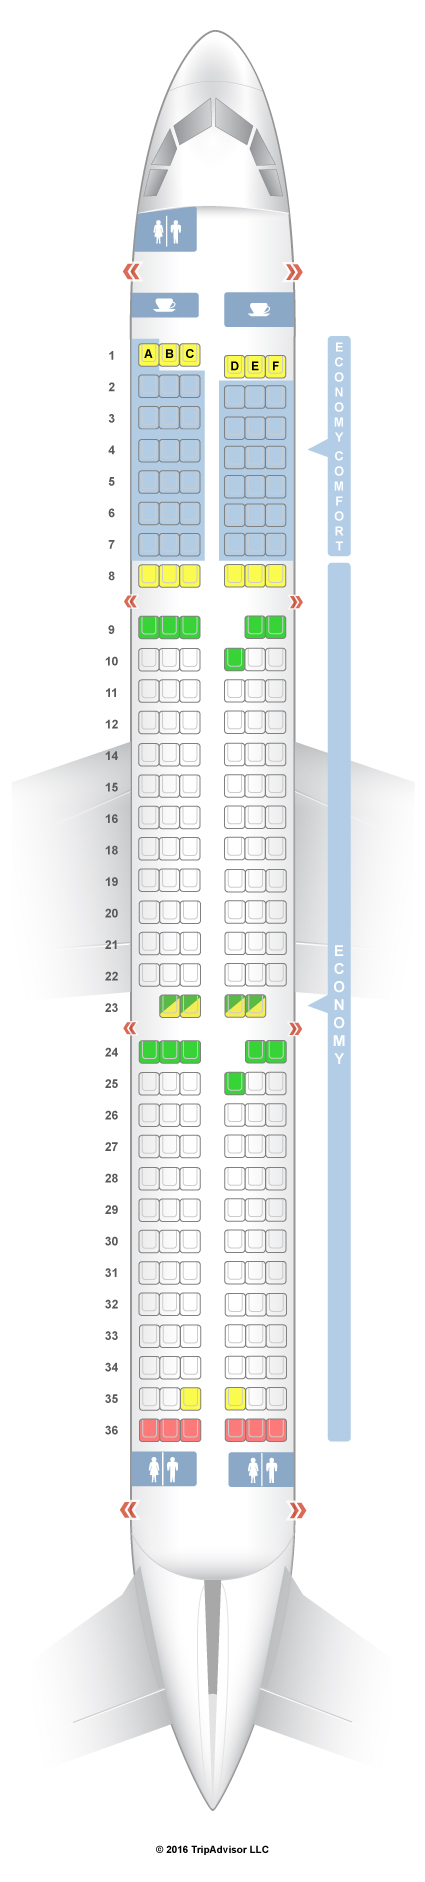 Airbus Industrie A321 Seating Chart